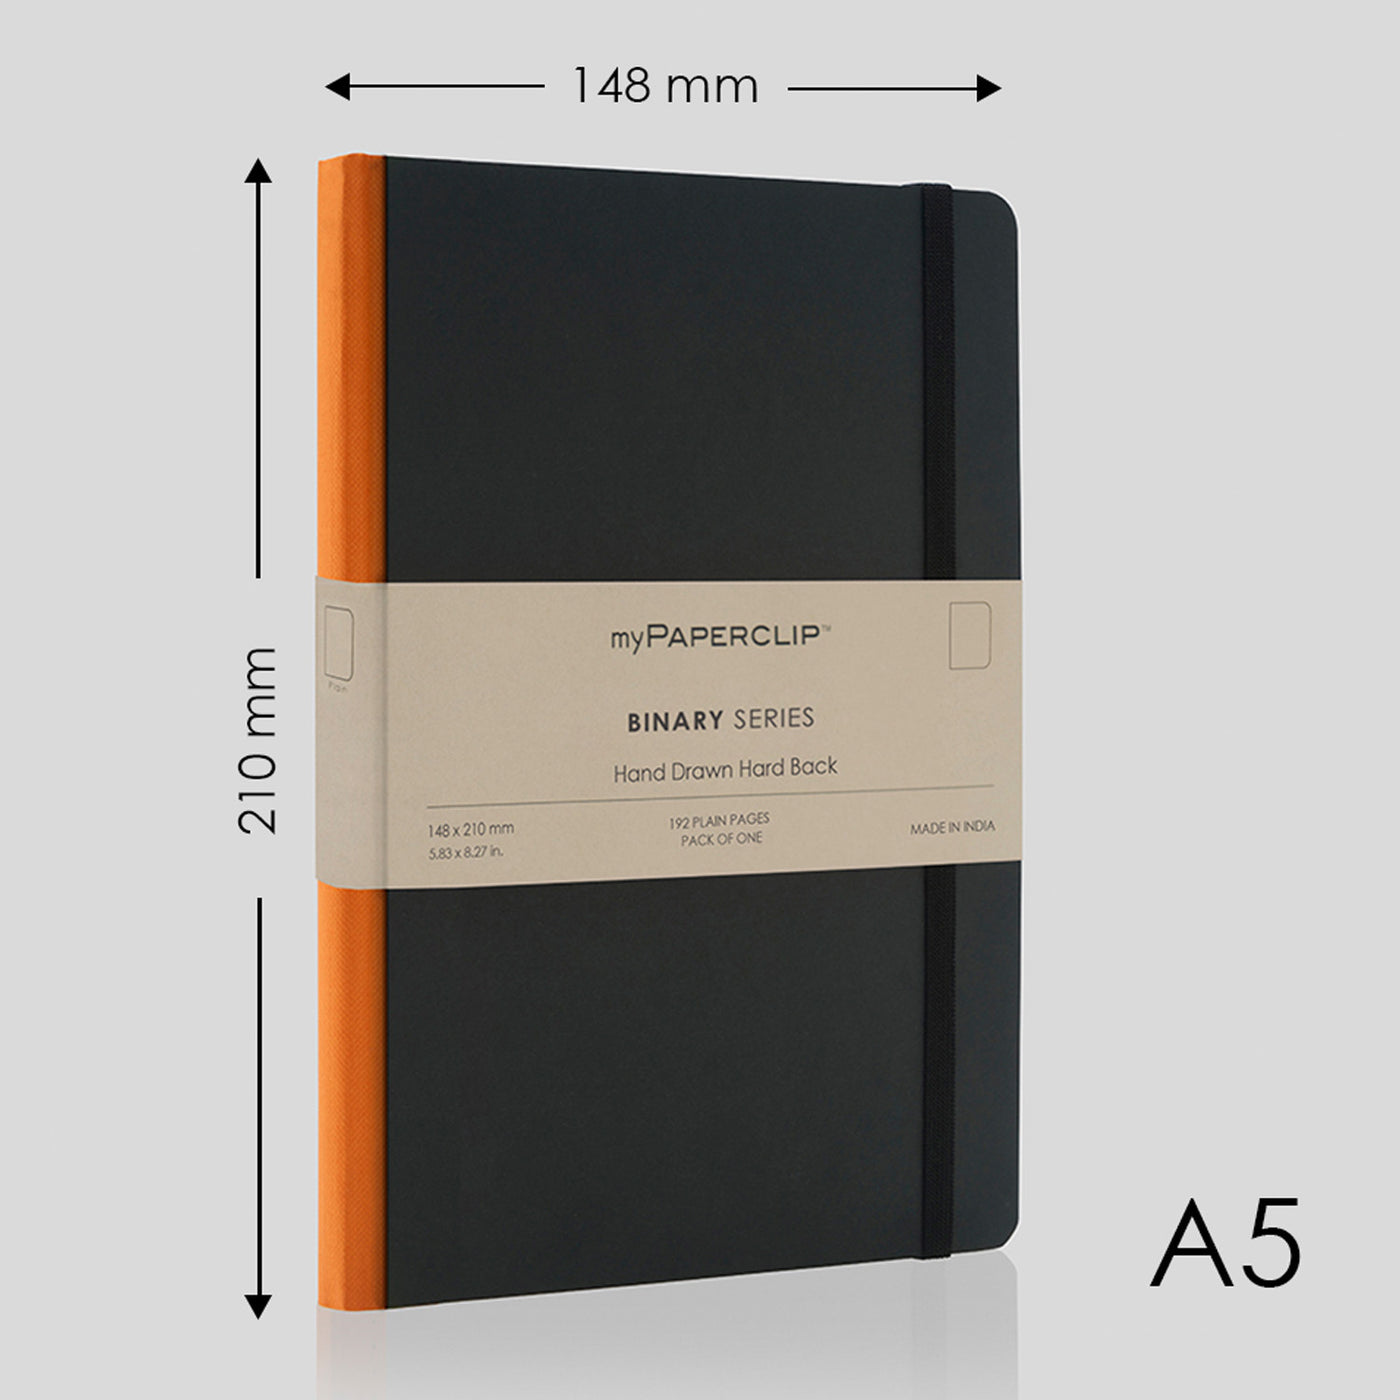 myPAPERCLIP Binary Series Hard Cover Notebook - Orange - A5 - Plain 2